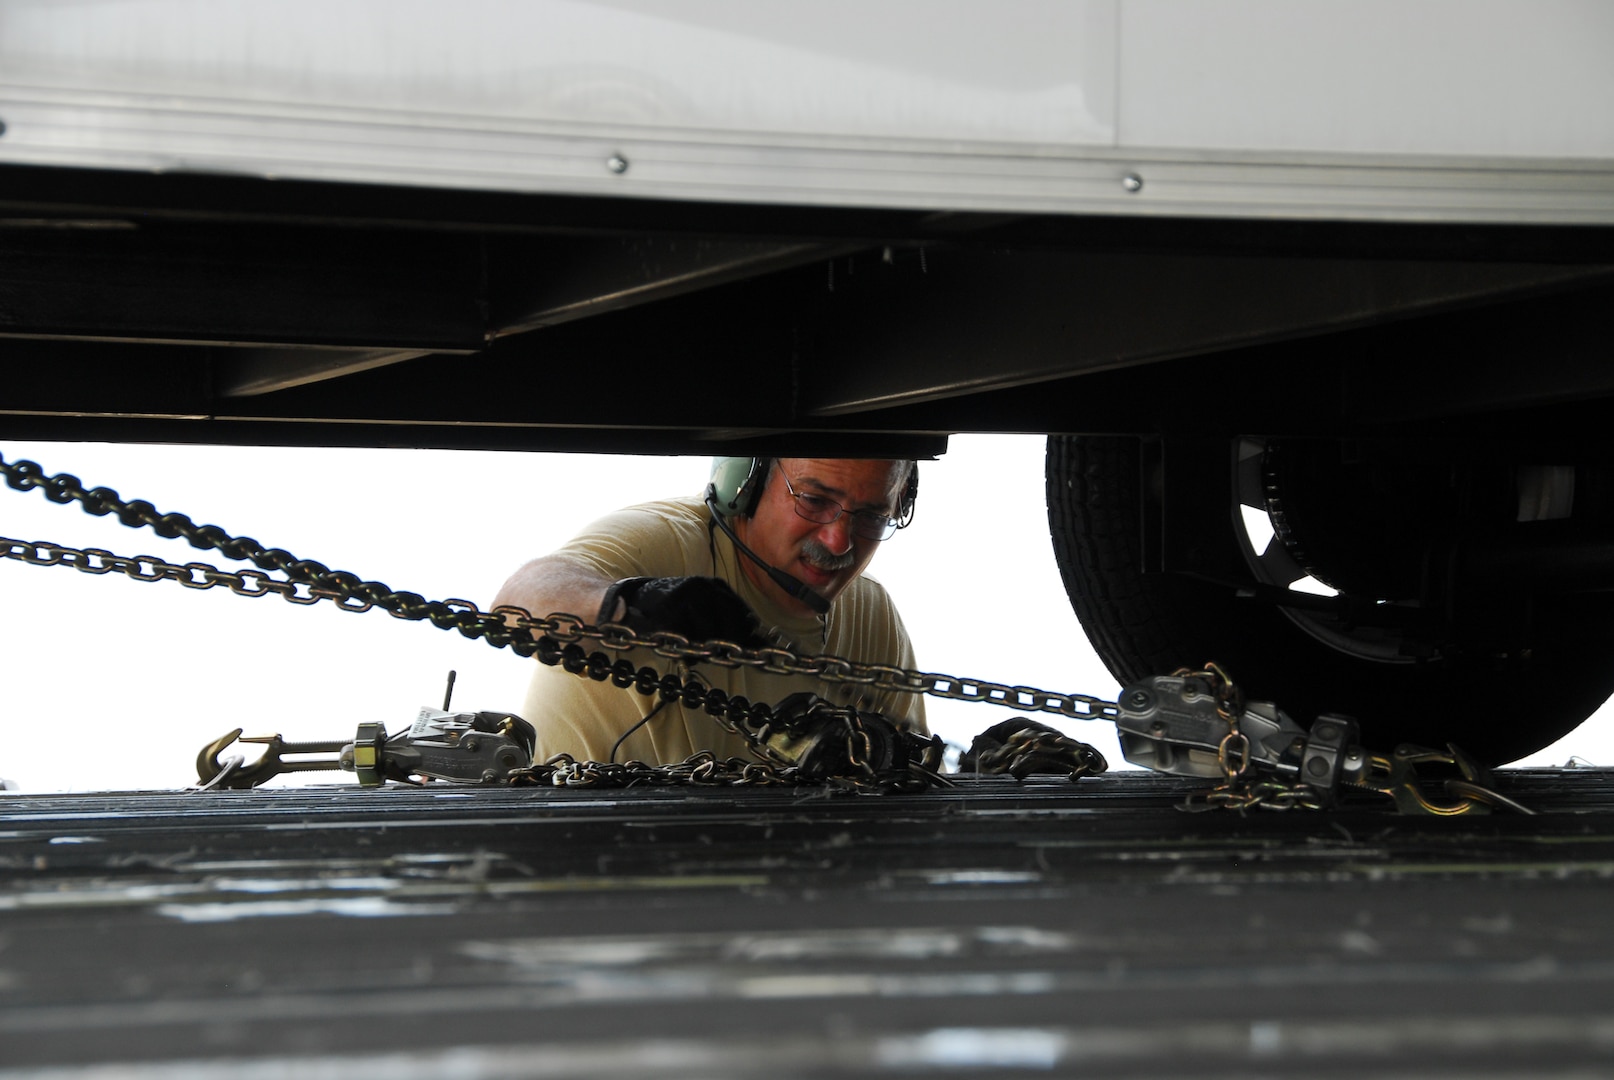 Air Force Tech. Sgt. Bart Panighetti, an air cargo specialist from the 146th
Airlift Wing, California Air National Guard, detaches a trailer loaded on a
C-17 Globemaster III military transport aircraft in Volk Field, Wis., July 9,
2011, for Patriot Exercise 2011. The C-17 had just transported a Chemical,
Biological, Radiological, Nuclear and high-yield Explosive Enhanced Response
Force Package from California to Wisconsin. The 9th CERFP, of the California
National Guard, was the first team transported entirely by military aircraft
as part of Patriot, an international large-scale emergency response training
exercise.